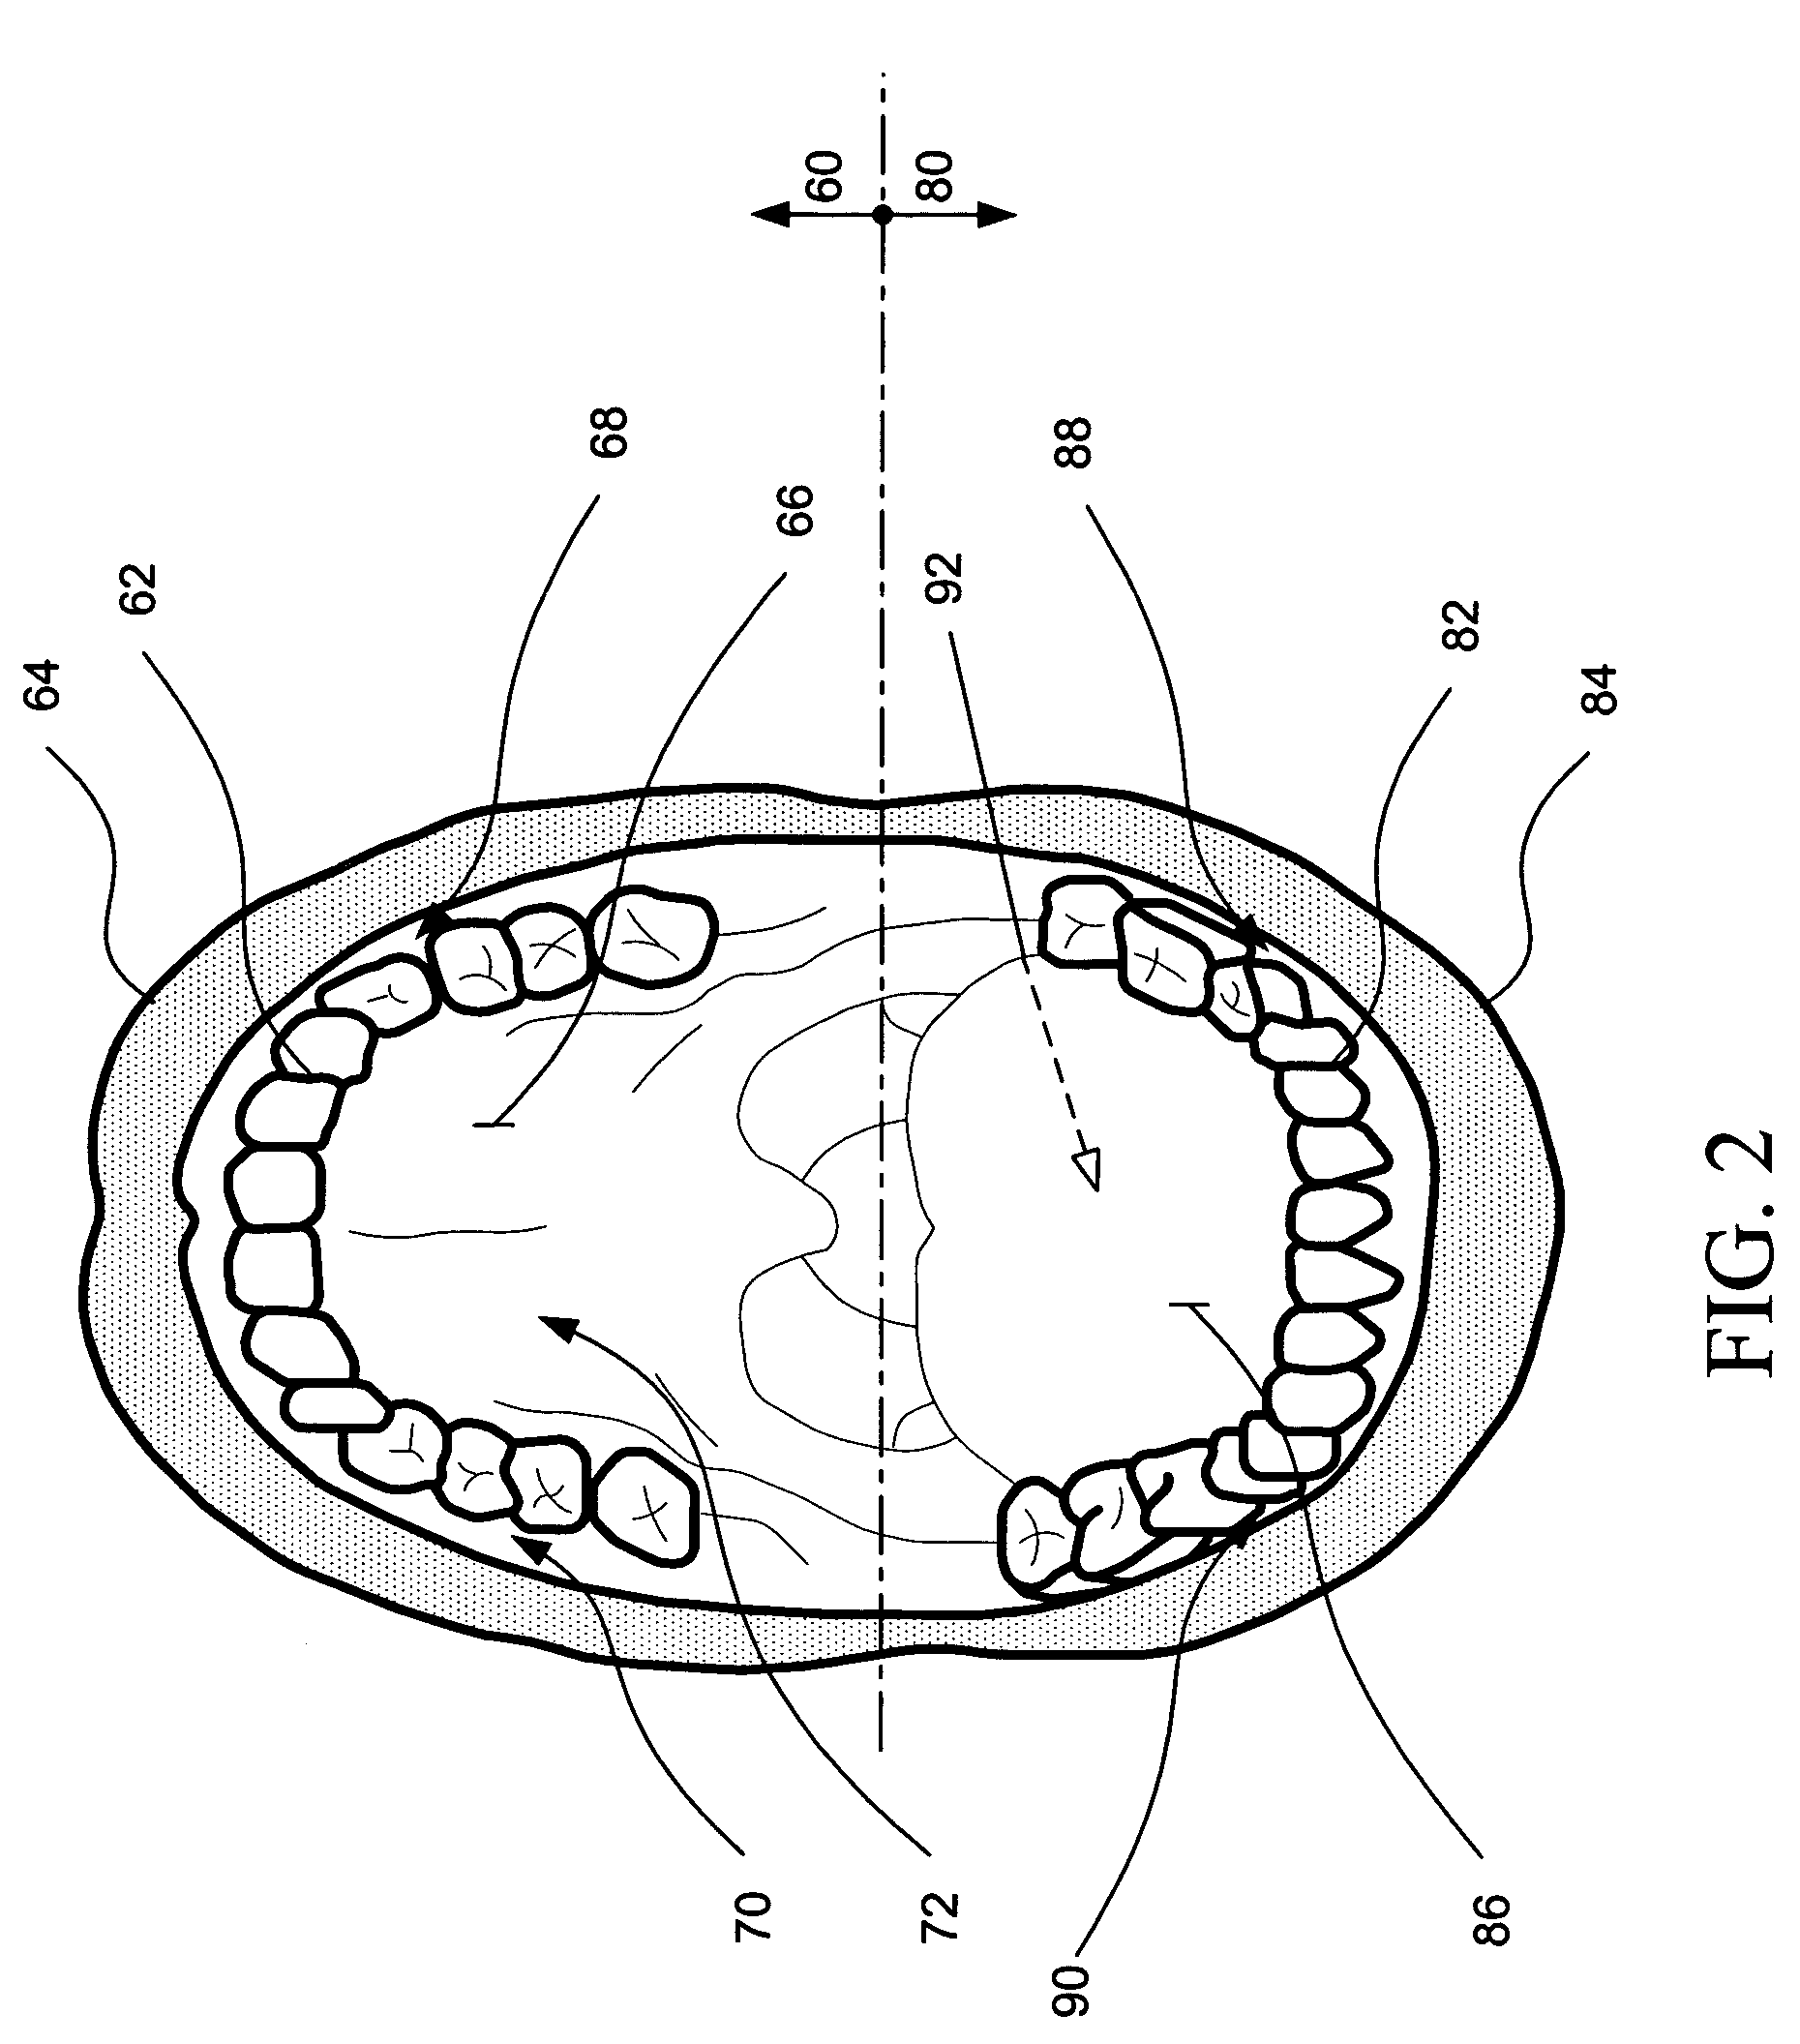 Intraoral aversion devices and methods